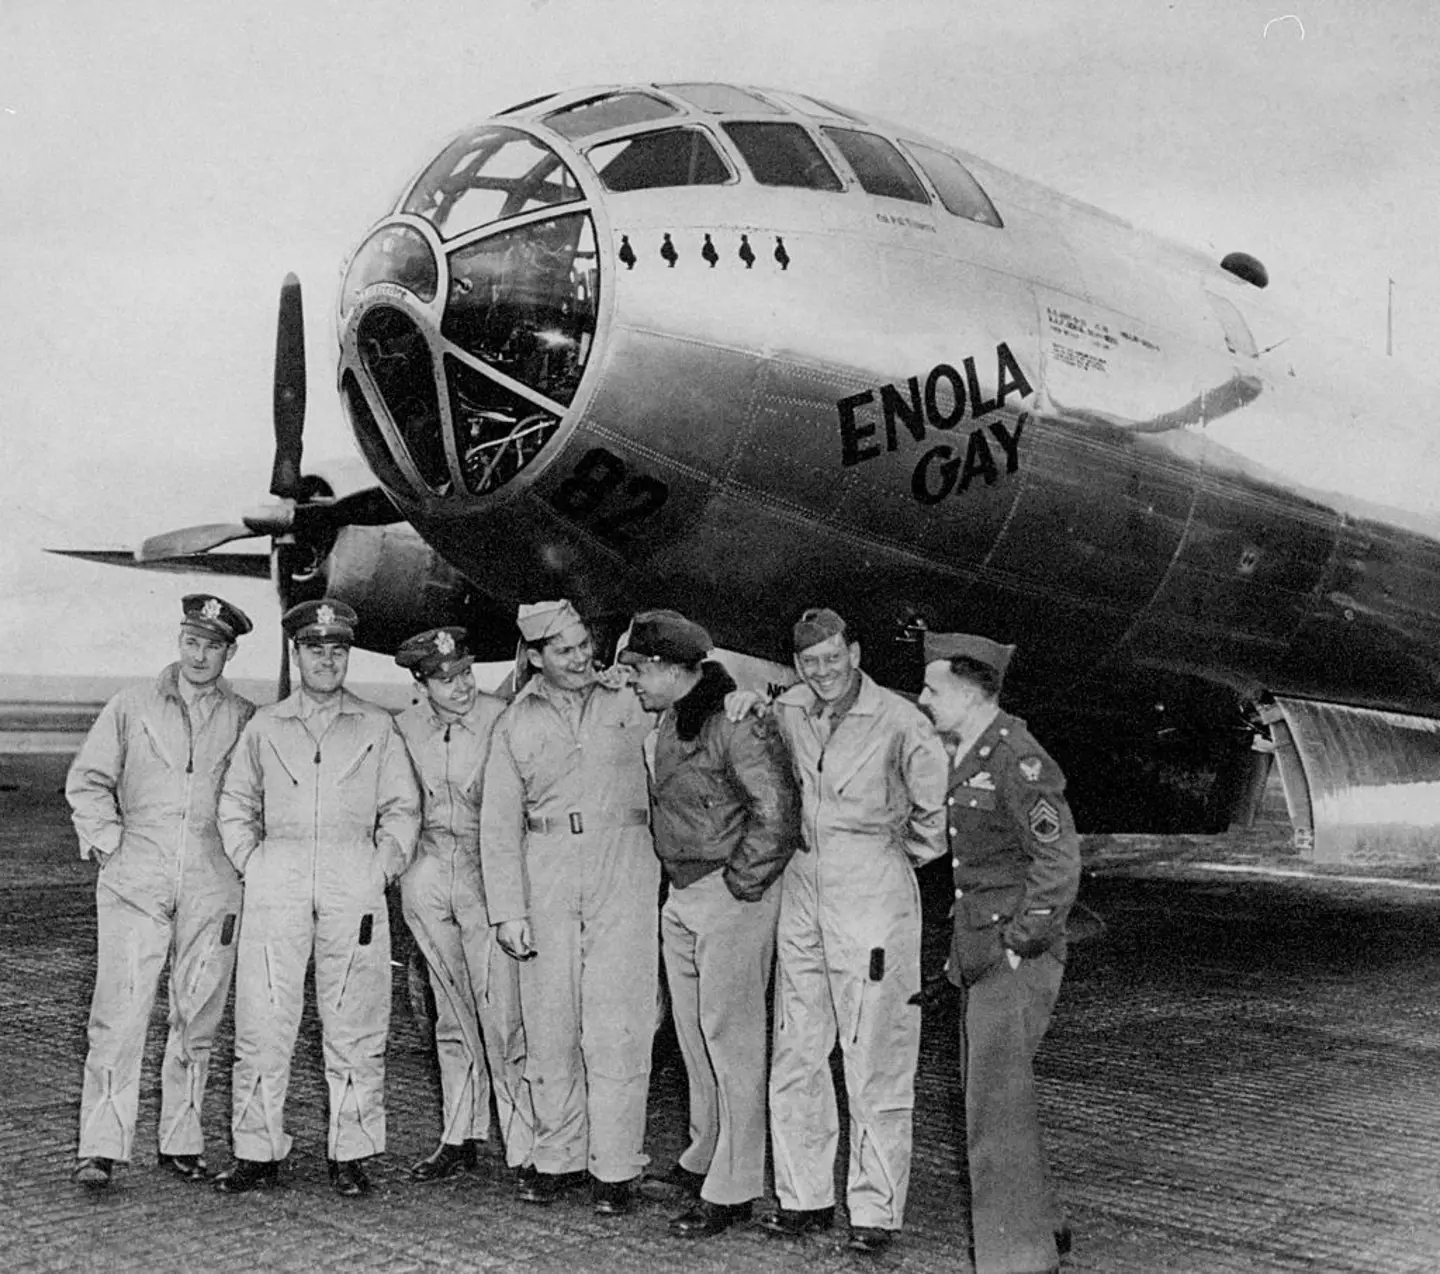 The crew of Enola Gay, the plane which dropped the atomic bomb over Hiroshima.